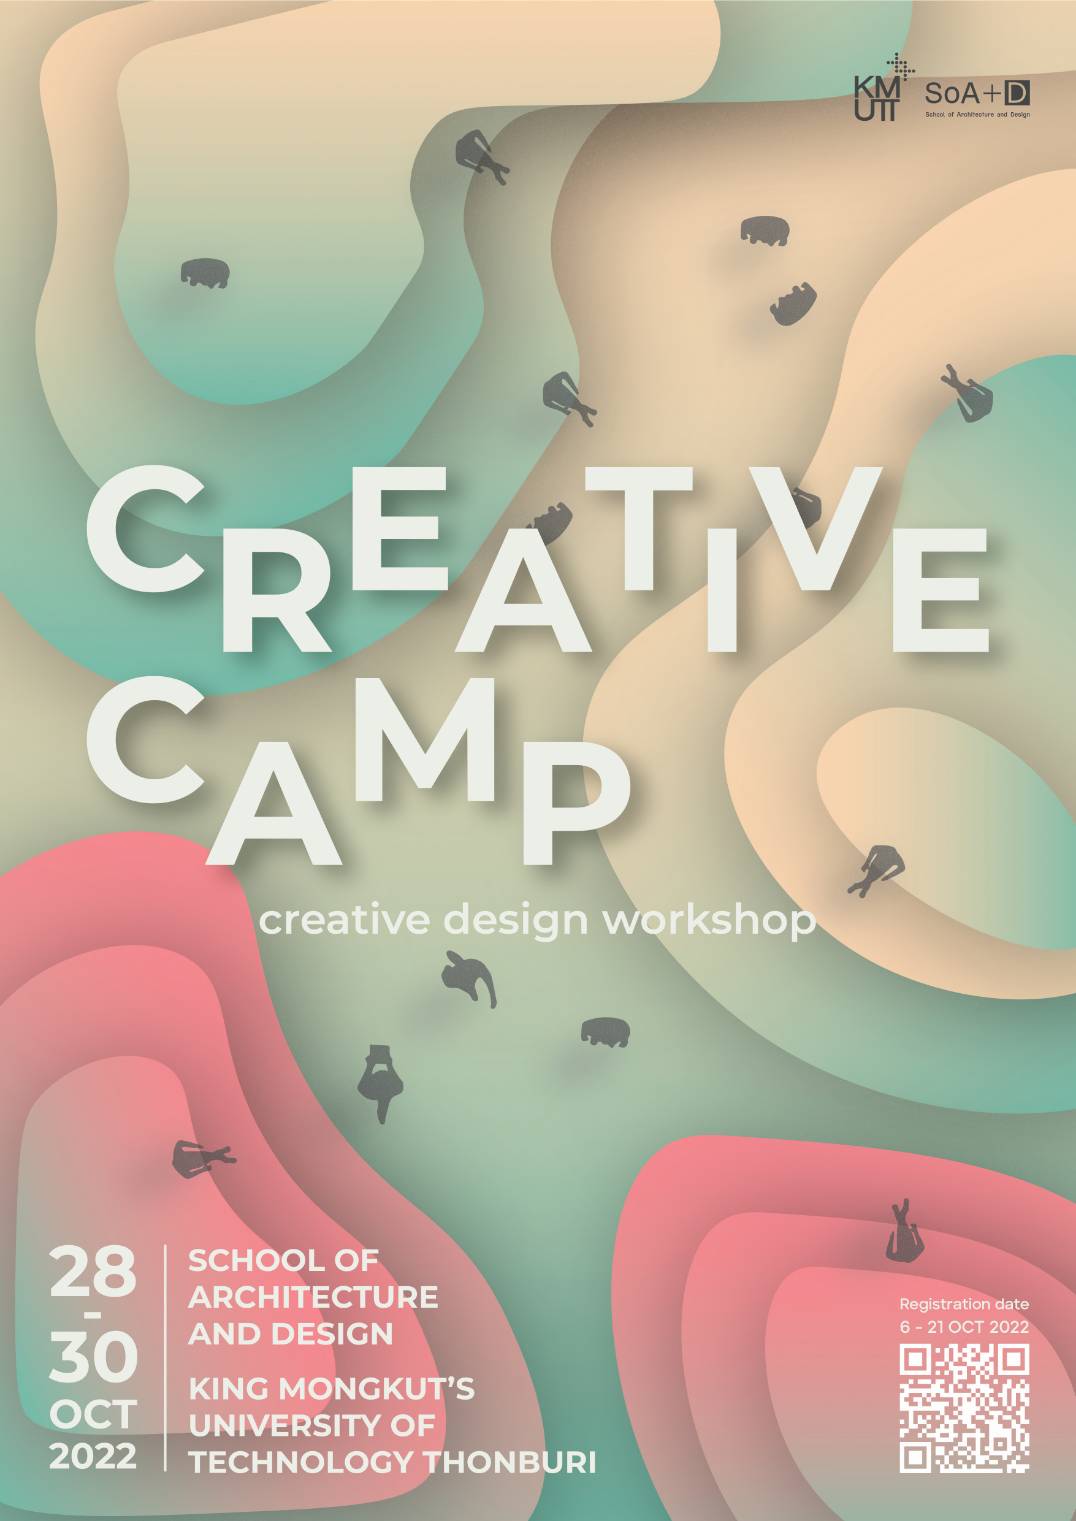 Creative Camp is coming back !!!